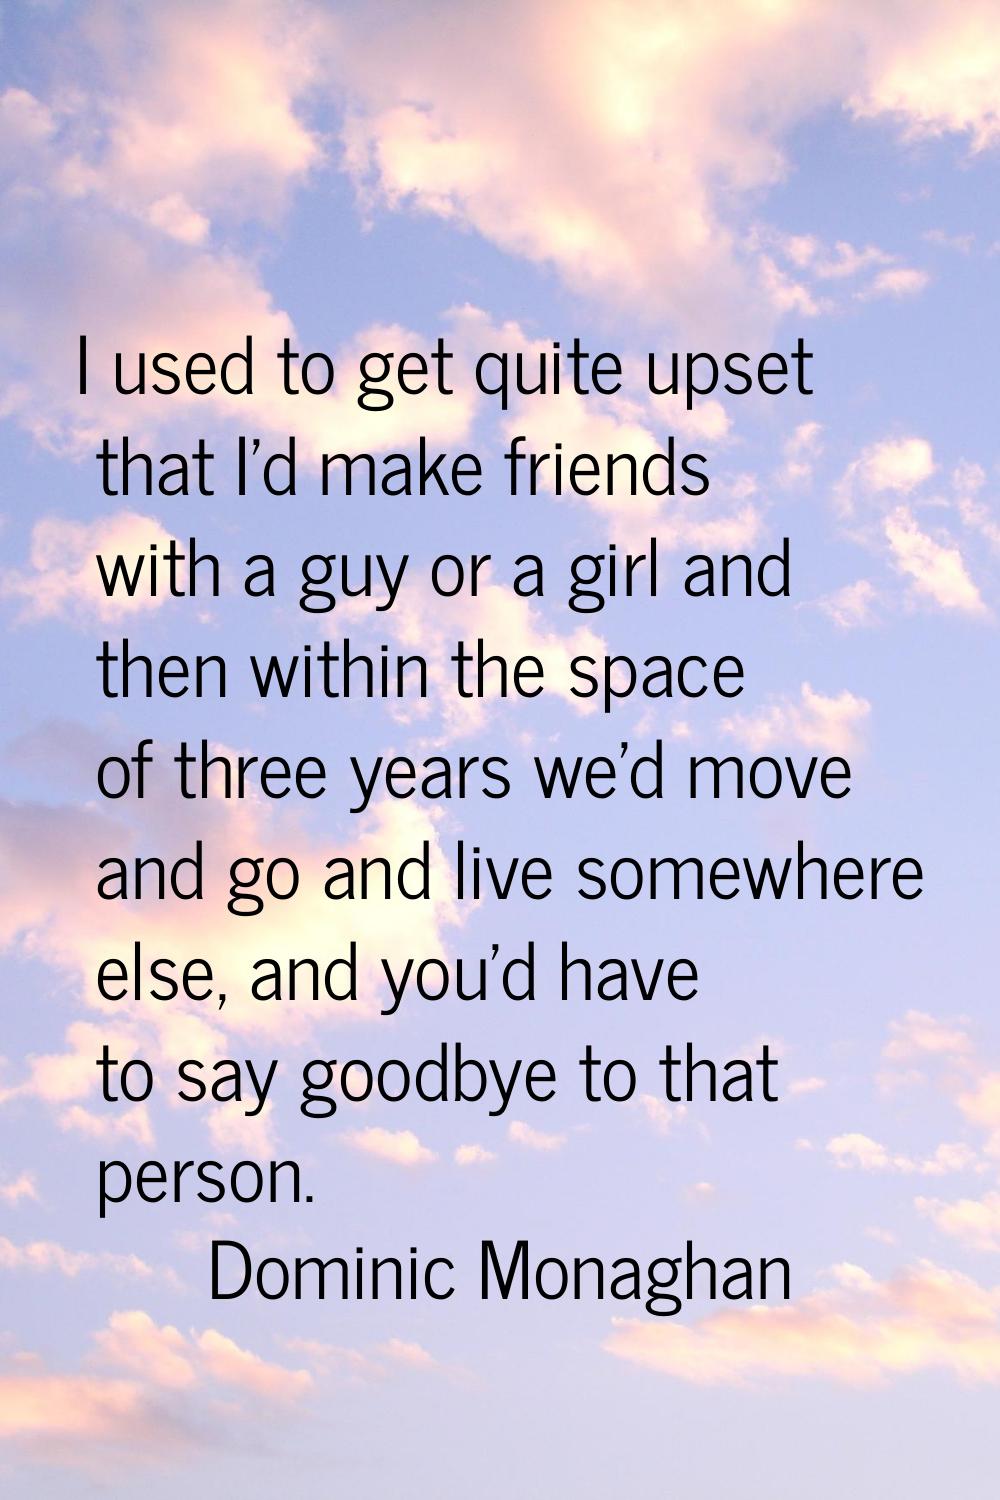 I used to get quite upset that I'd make friends with a guy or a girl and then within the space of t